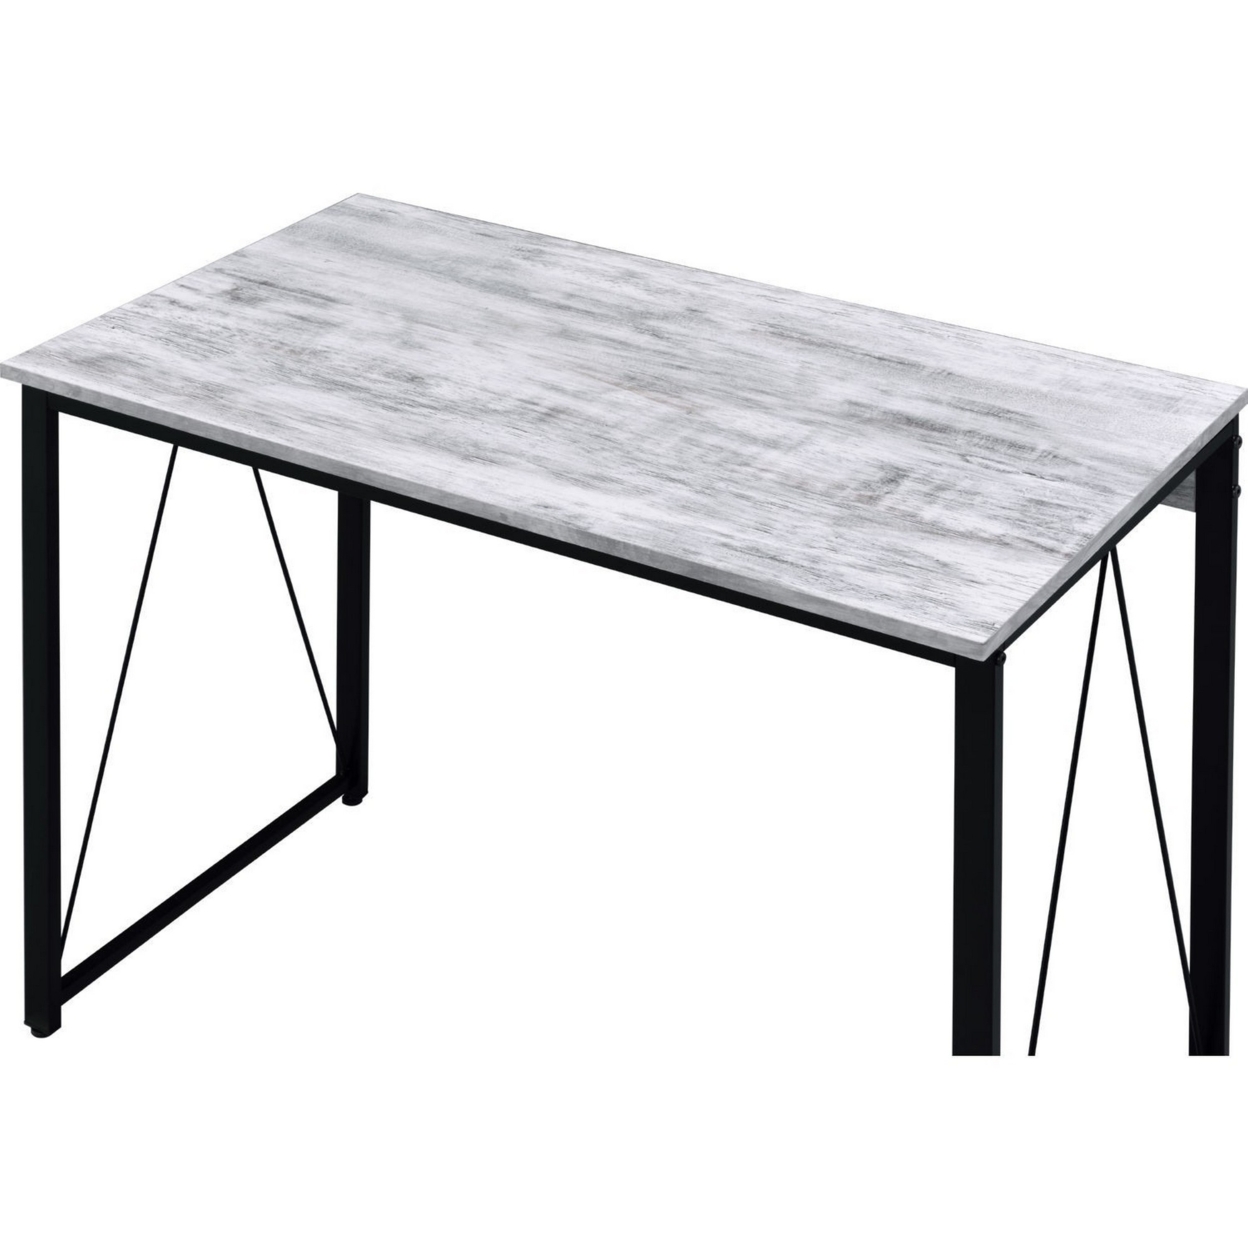 Writing Desk With V Shaped Accent And Distressed Look, White- Saltoro Sherpi